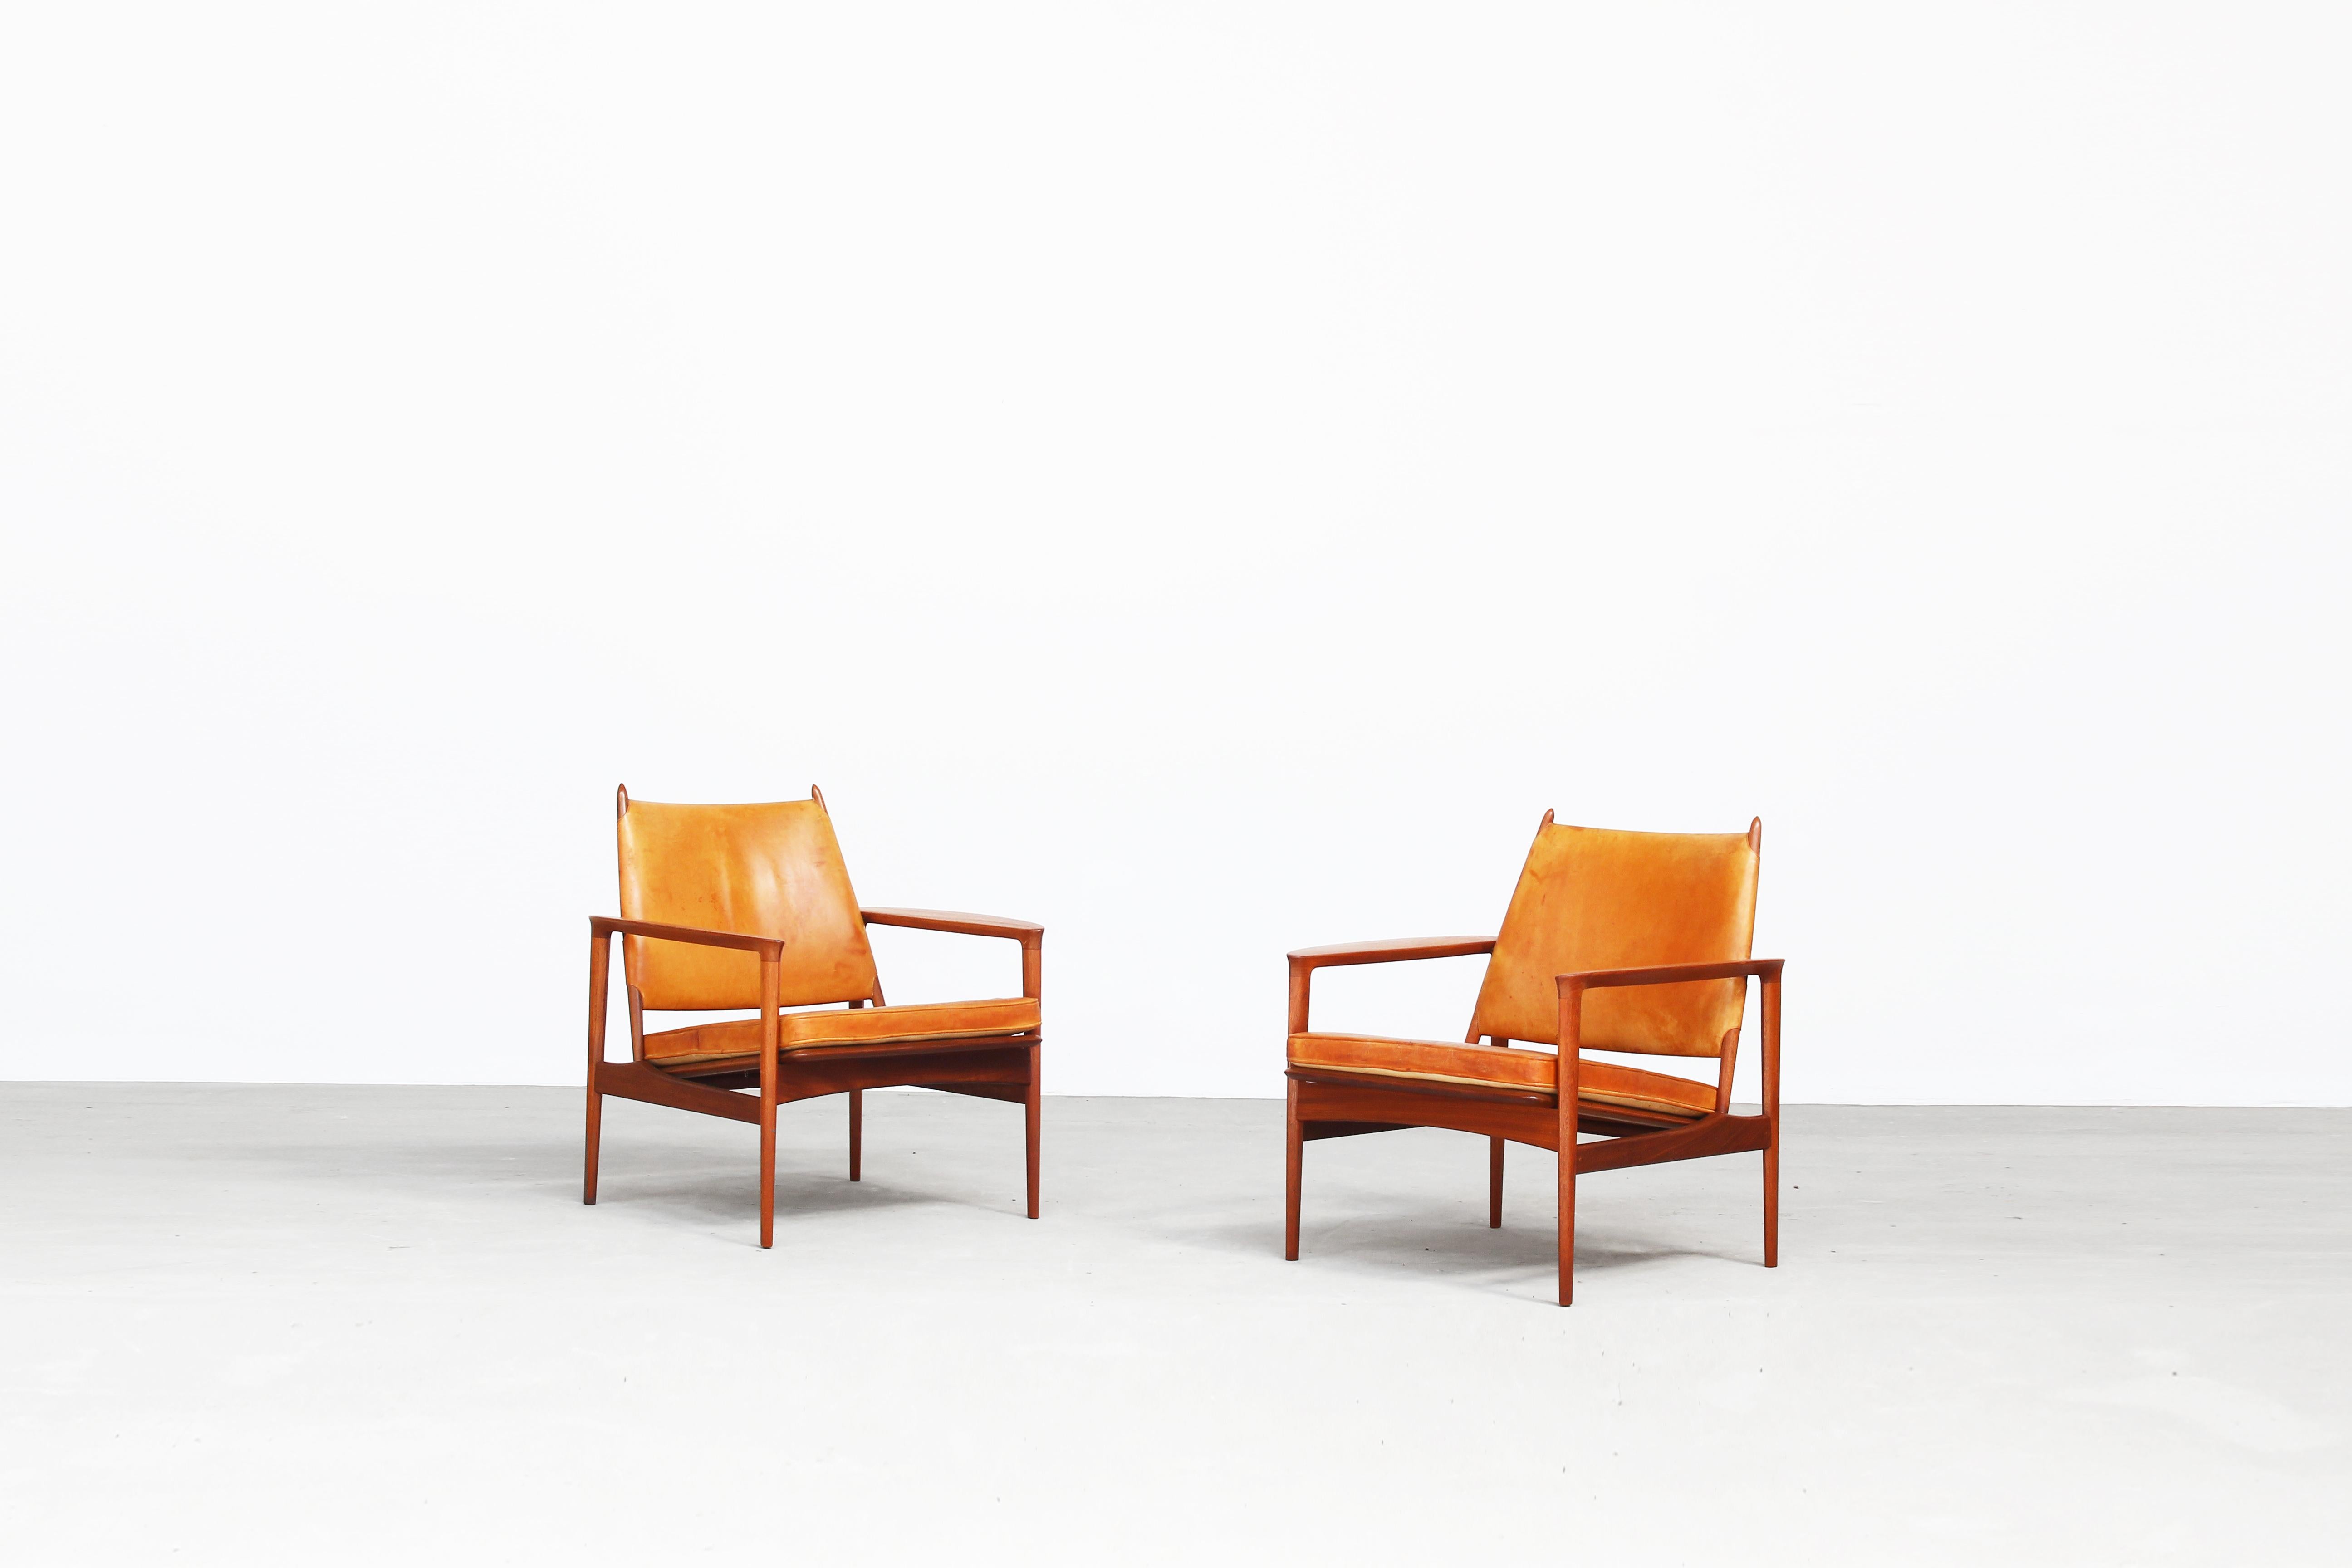 Very rare and beautiful pair of lounge chairs designed by Torbjørn Afdal and produced by Svein Bjørneng in Norway, 1958.
These chairs are in an original condition and come with a perfectly patinated leather. The wooden frames are in an excellent